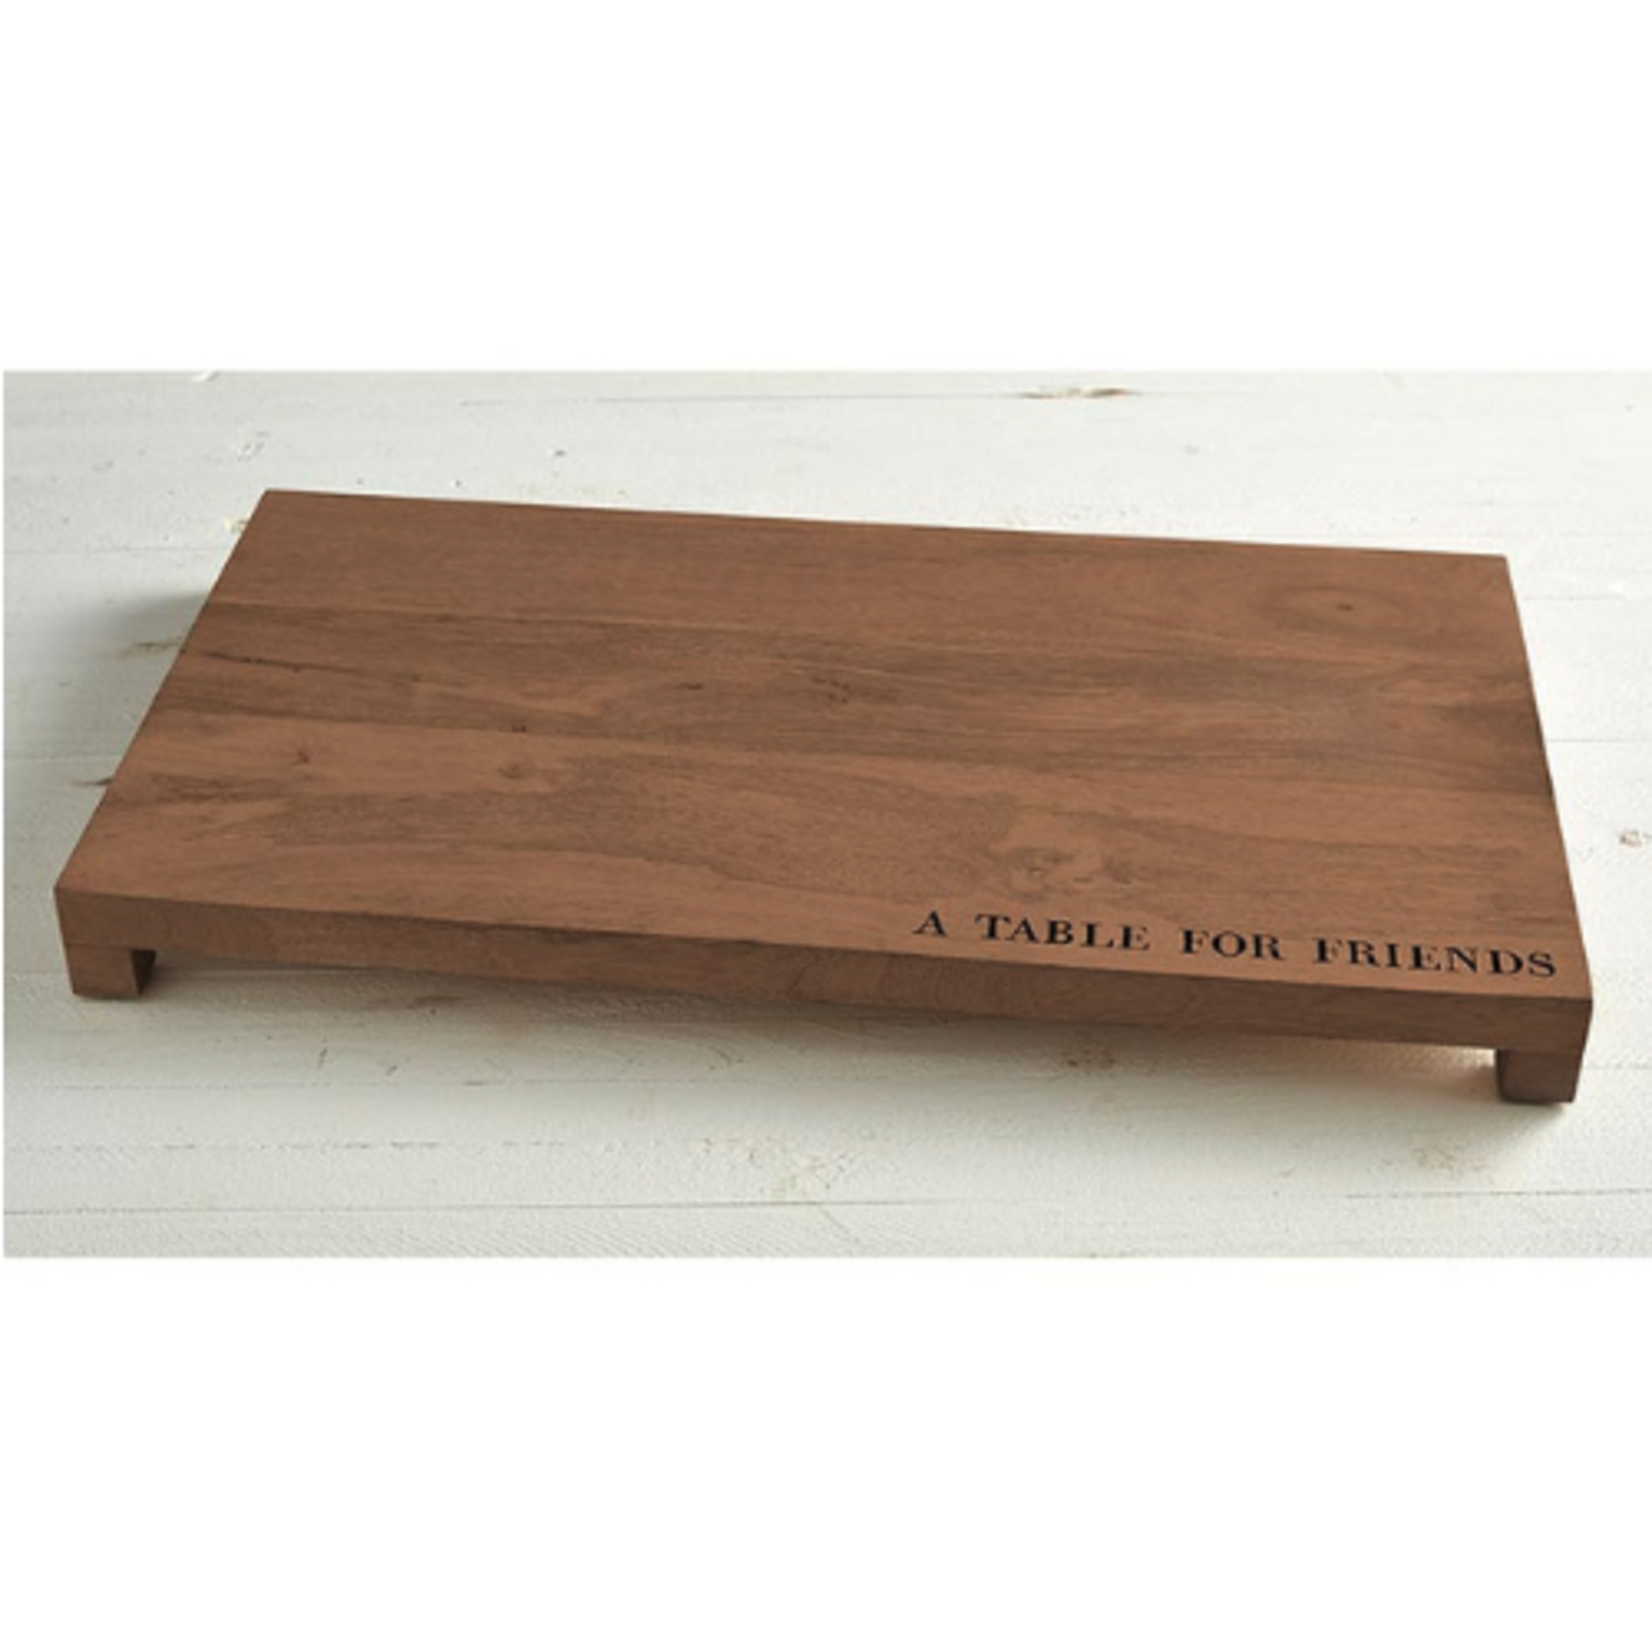 Outside The Box 24x13 "A Table For Friends" Serving Tray / Charcuterie Board